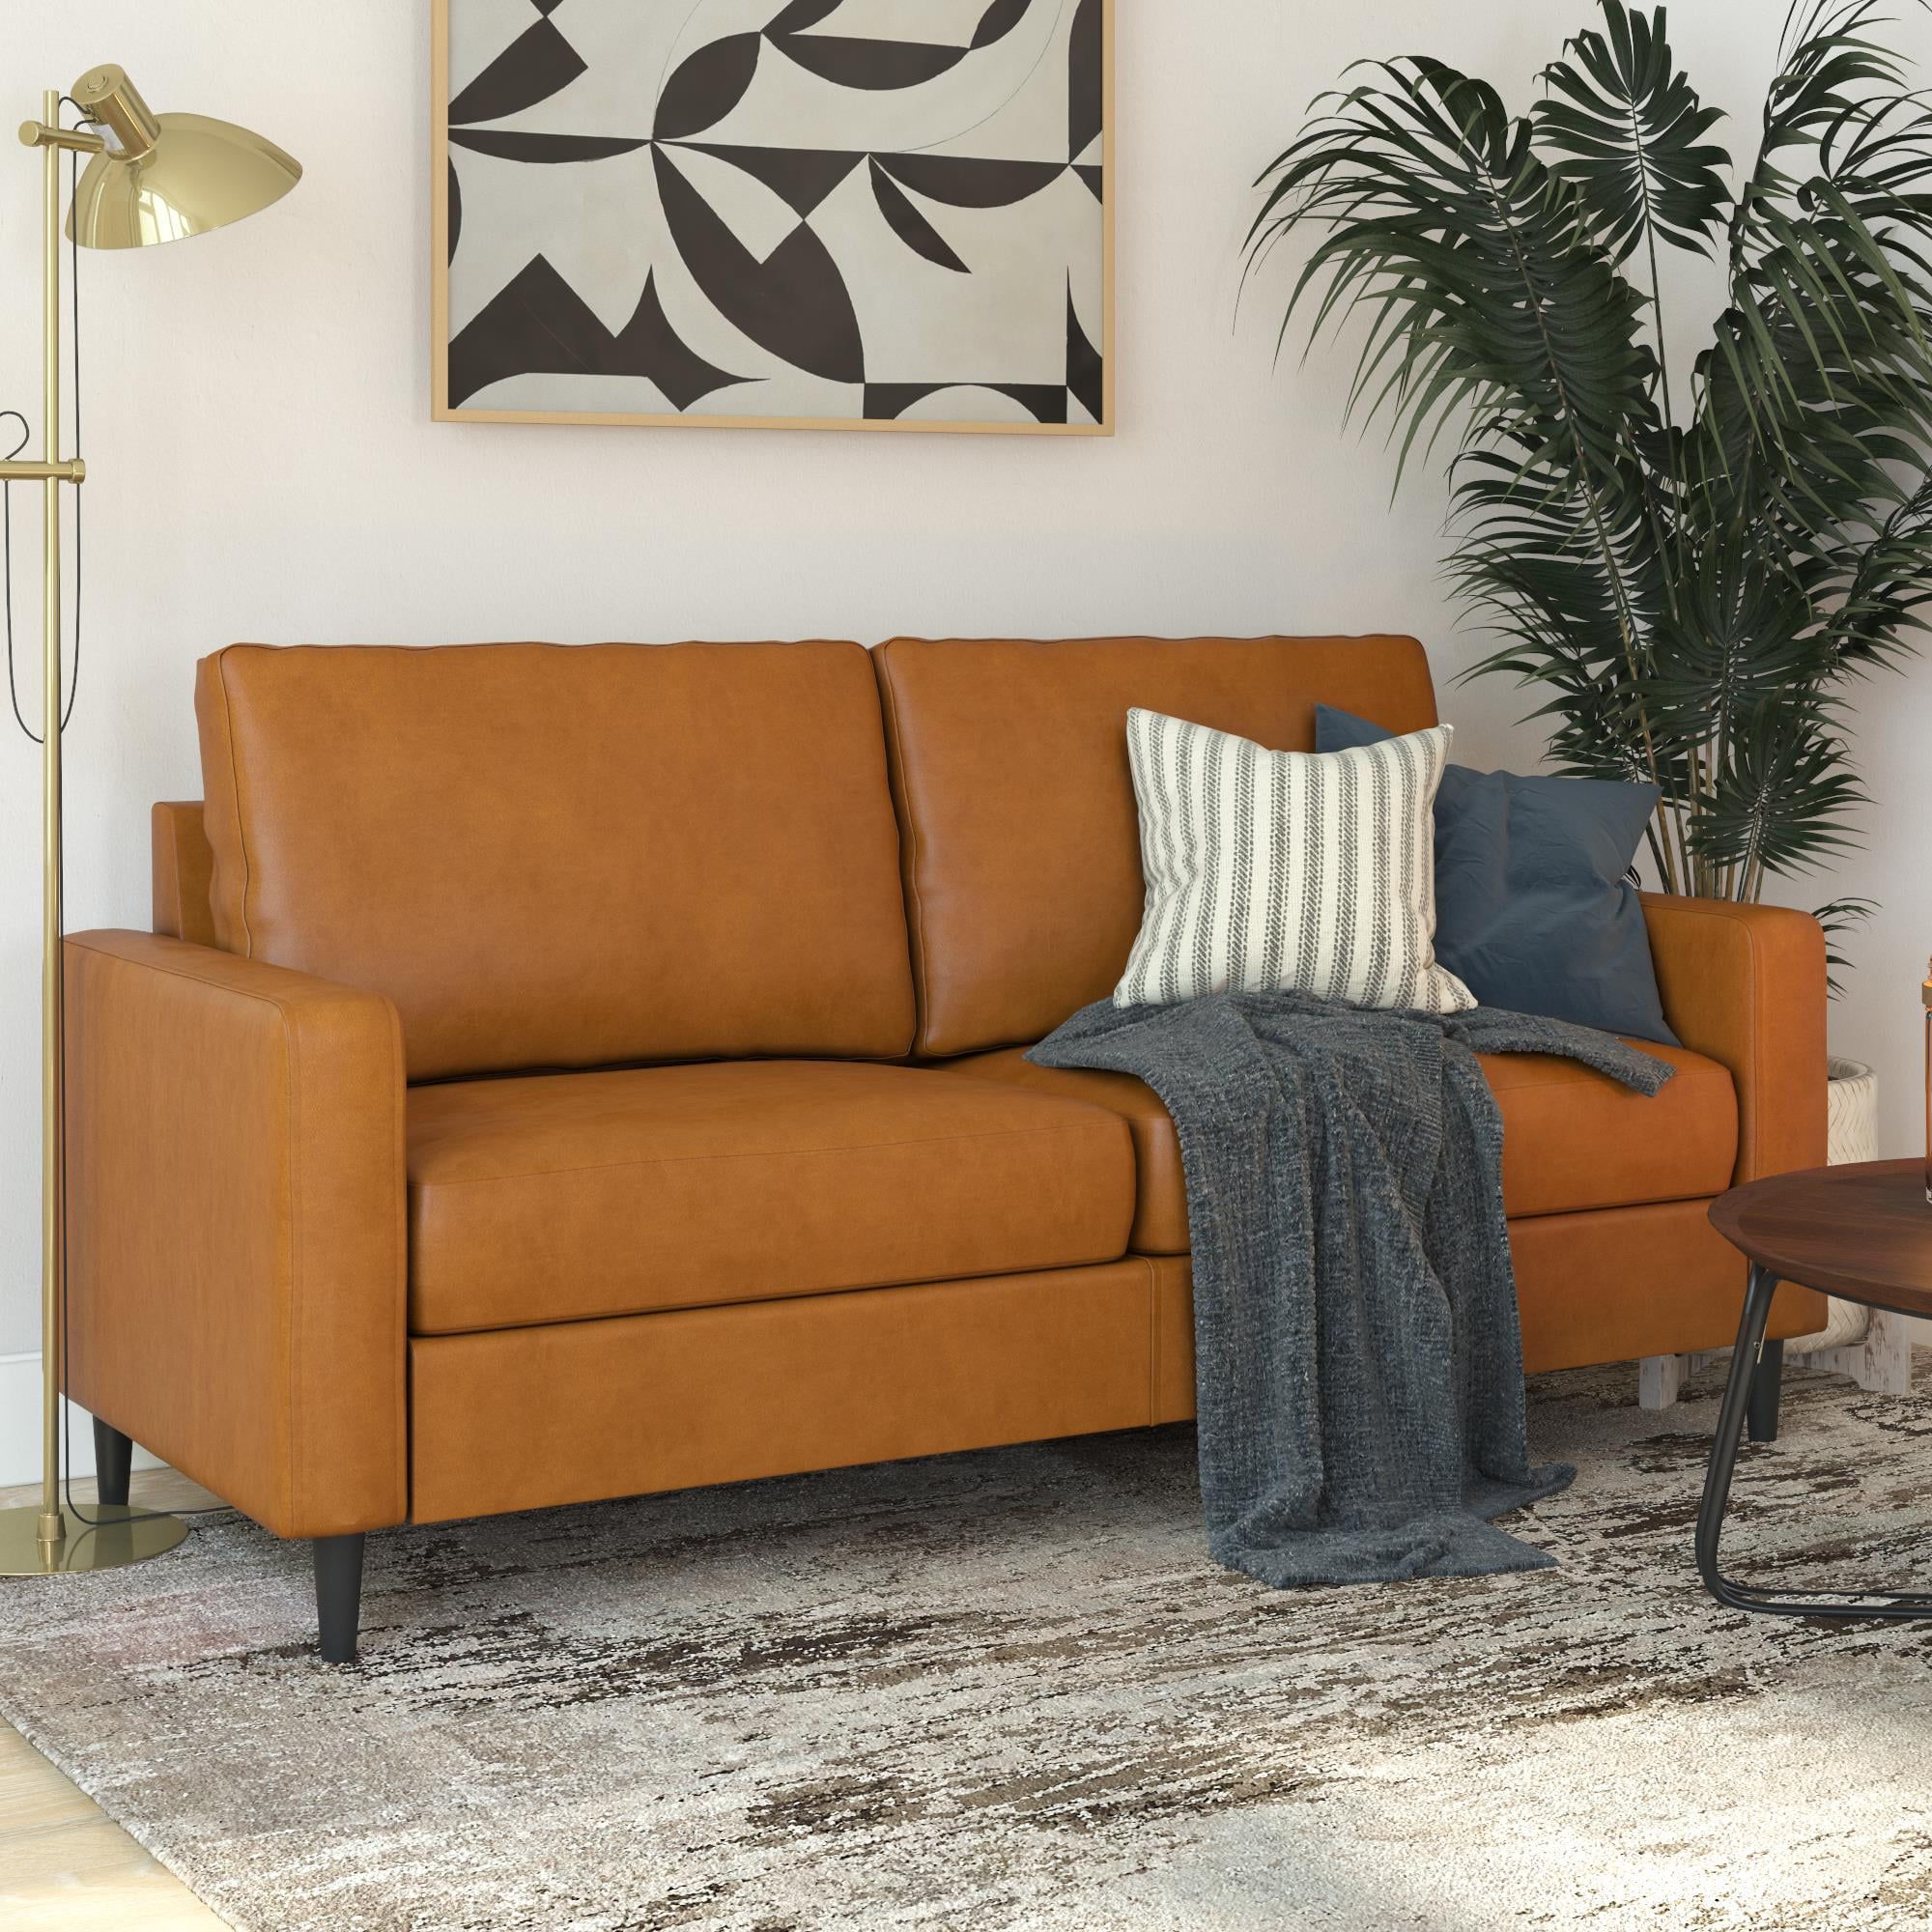 Newest Dhp Connor Modern Sofa, Small Space Living Room Furniture, Camel Faux Throughout Sofas For Small Spaces (Photo 10 of 15)